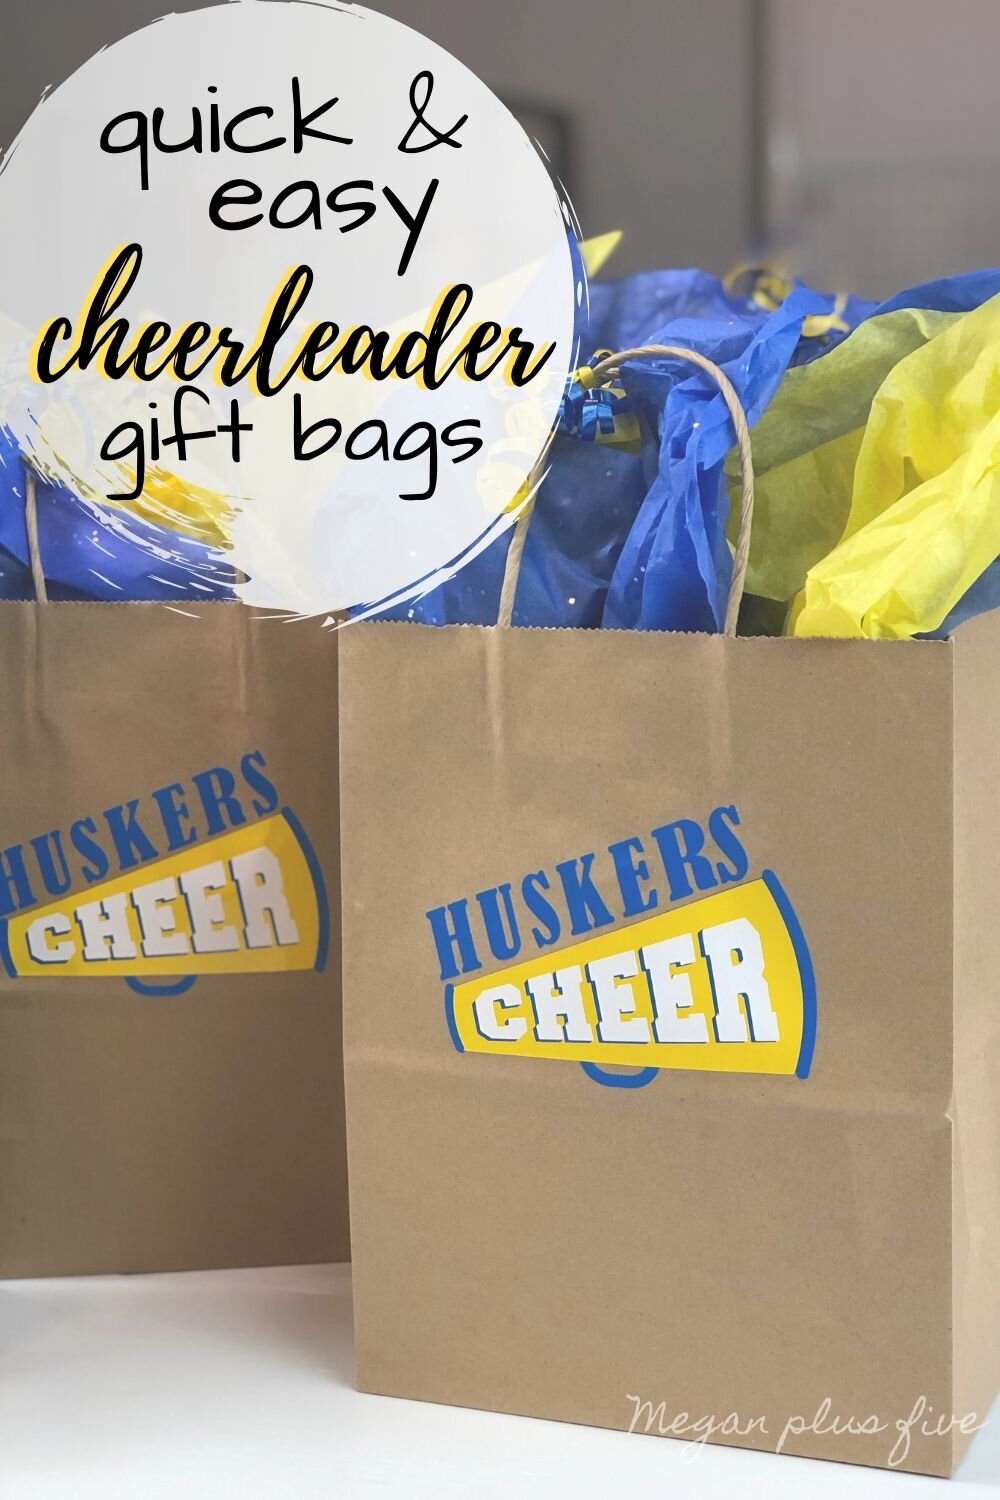 Cheerleader gift bags that are quick, easy, and inexpensive. Put together cute pampered gift bags for cheer appreciation gifts for the end of the season. Use your Cricut to make personalized vinyl decals.